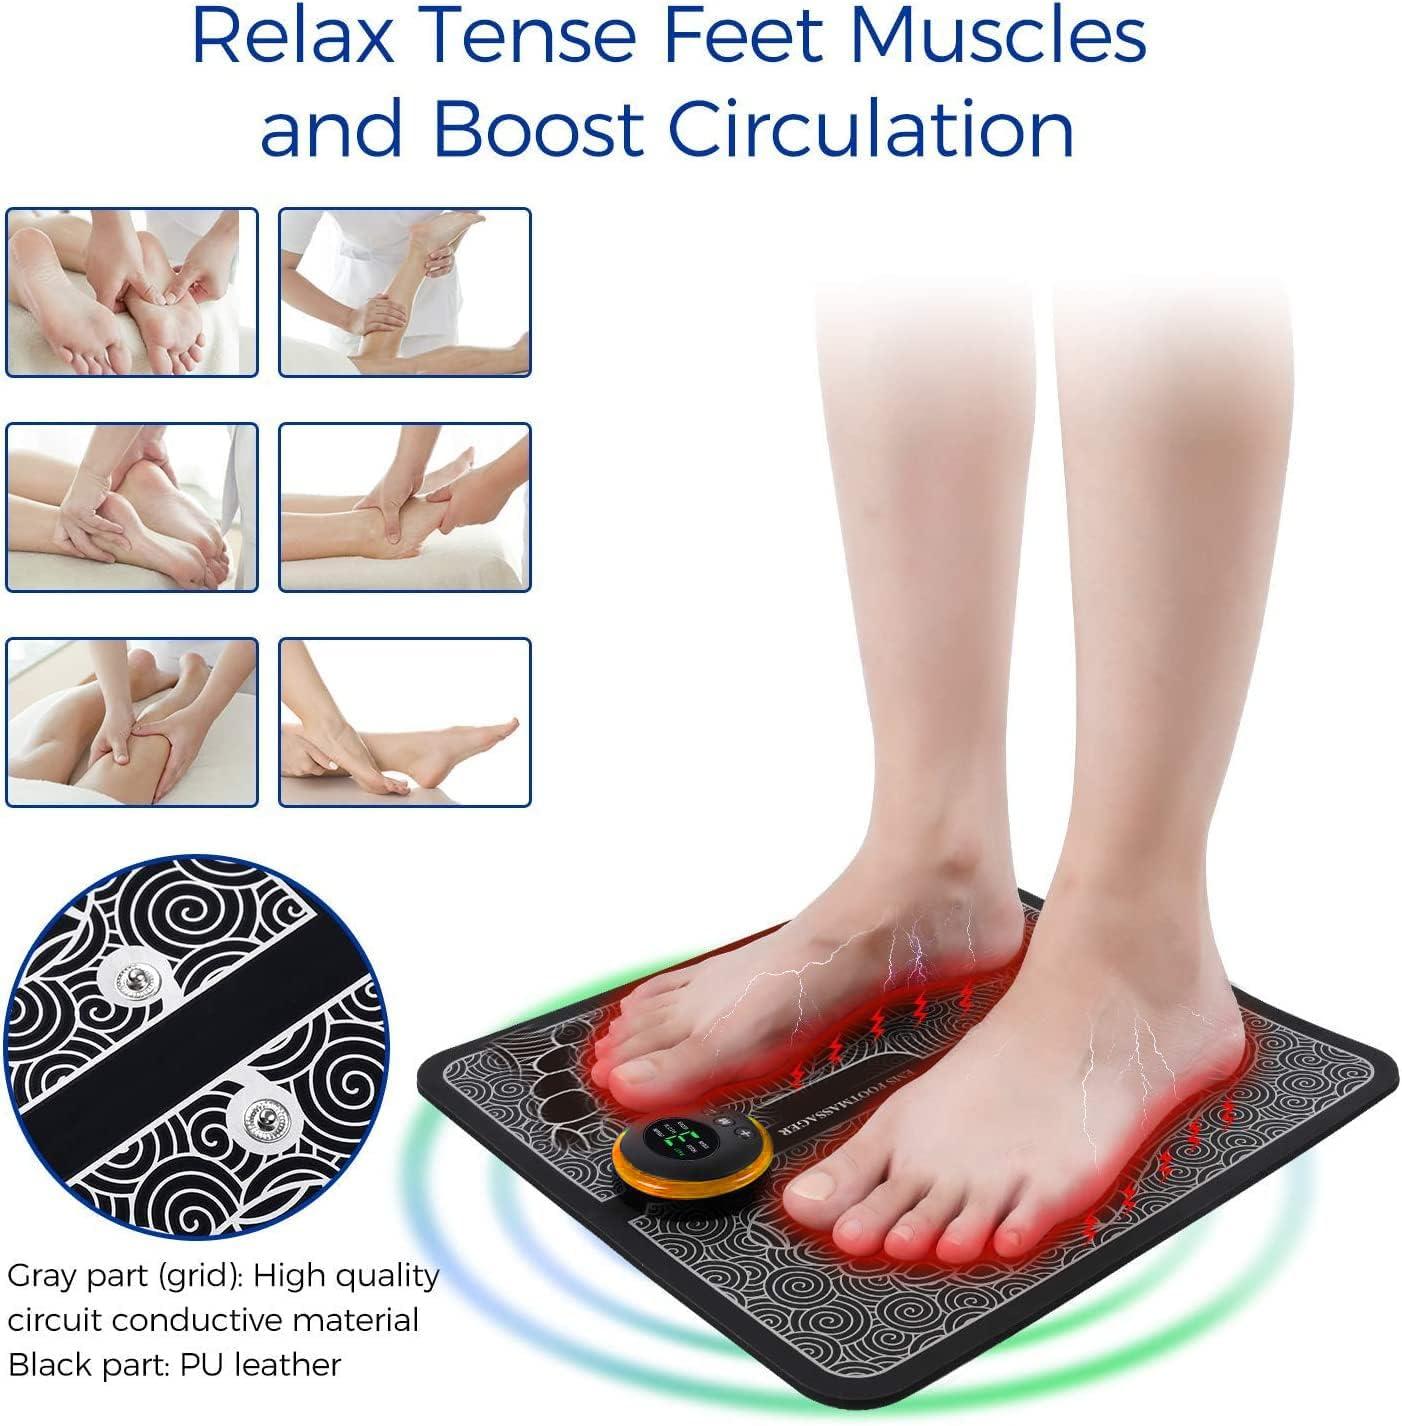 Foot Massager Mat Electric Foot Massager Pad EMS Feet Massage Machine with  8 Massage Modes and 19 Intensity Levels for Home and Office Use 